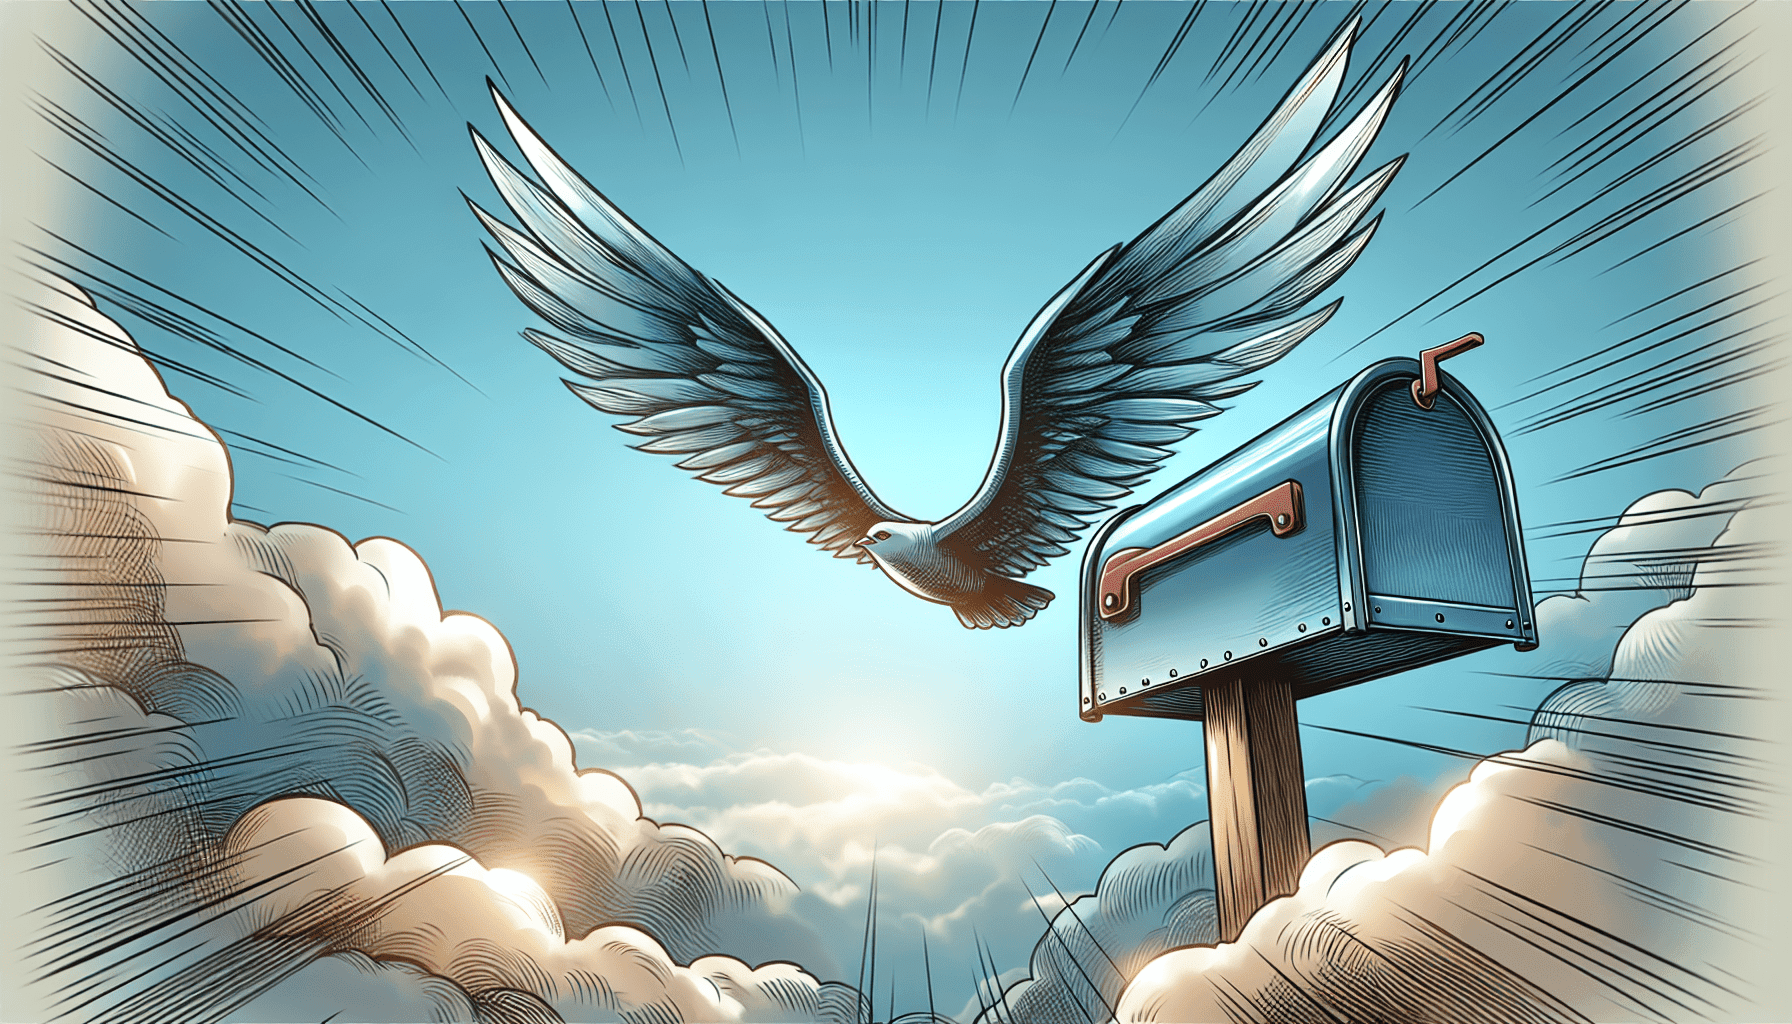 A sleek, metallic mailbox with wings, soaring through a cloudy sky.